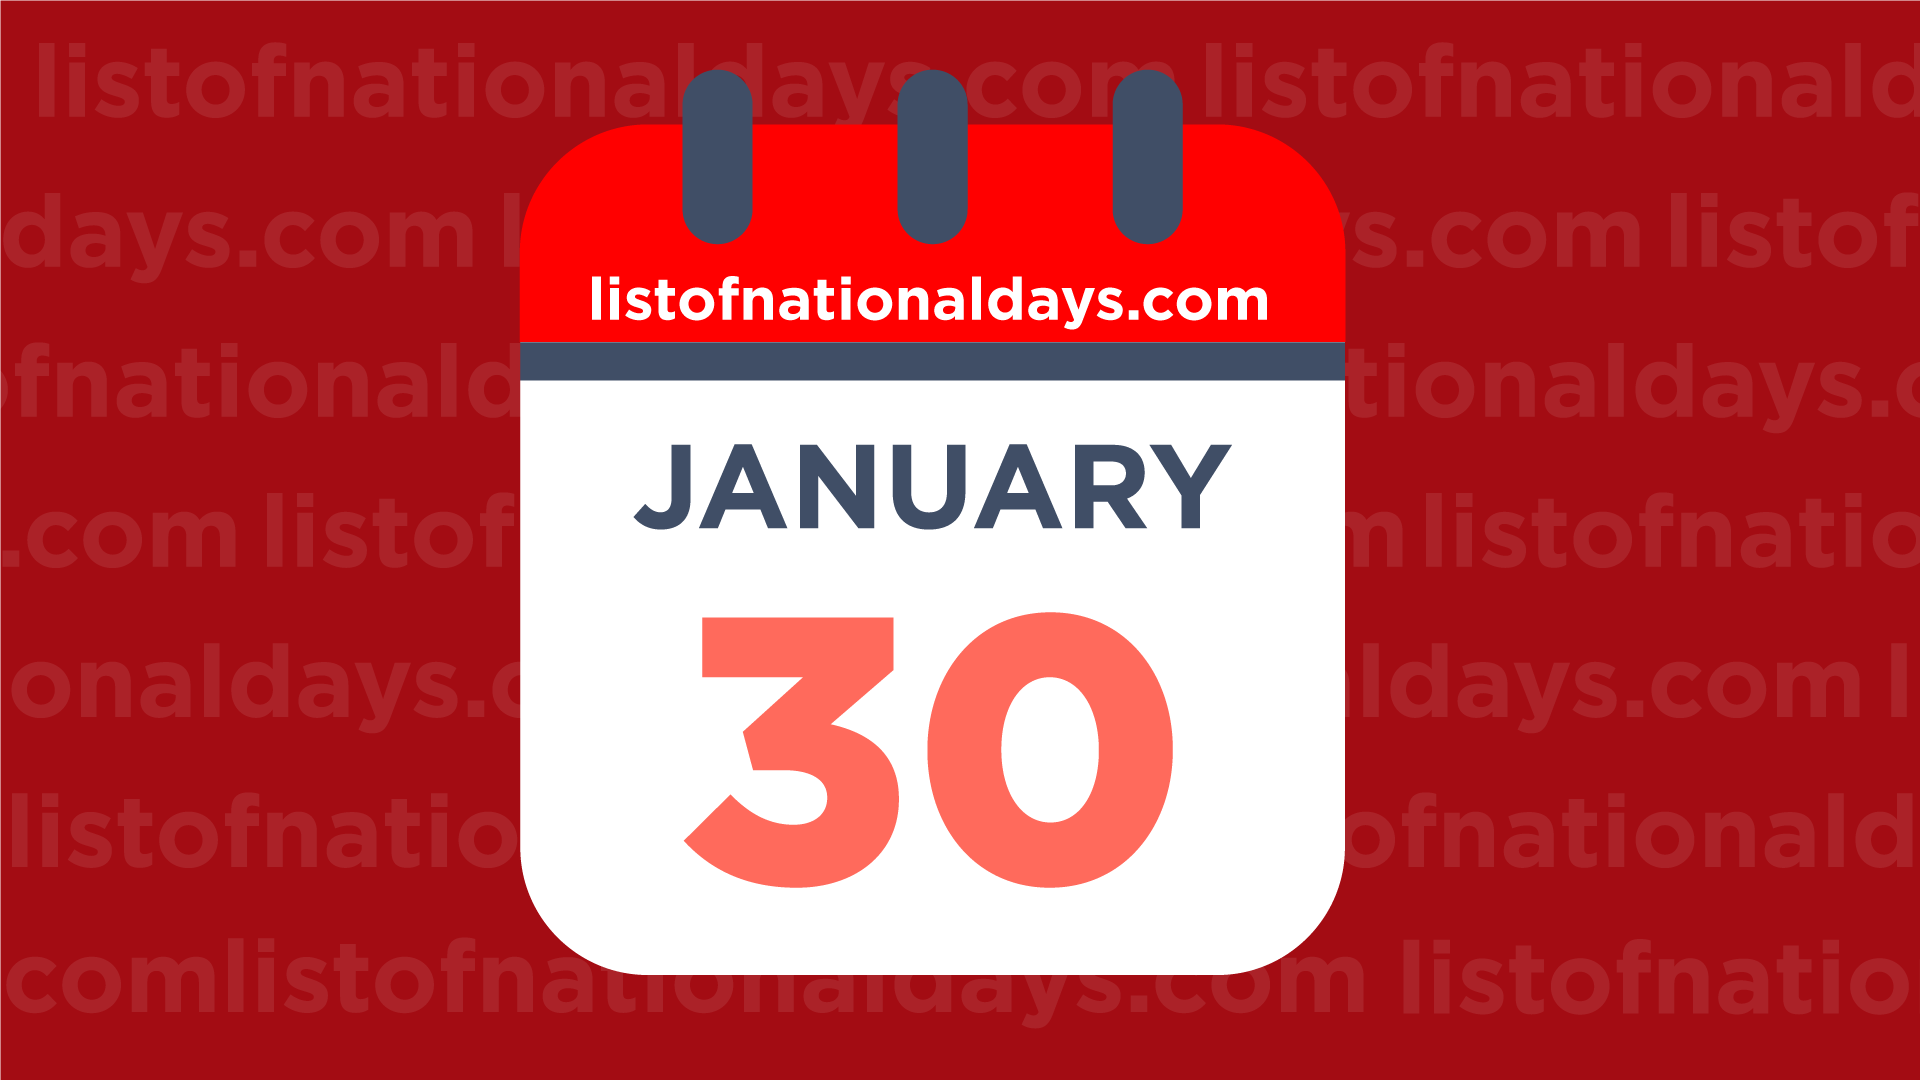 JANUARY 30TH: National Holidays,Observances & Famous Birthdays1920 x 1080